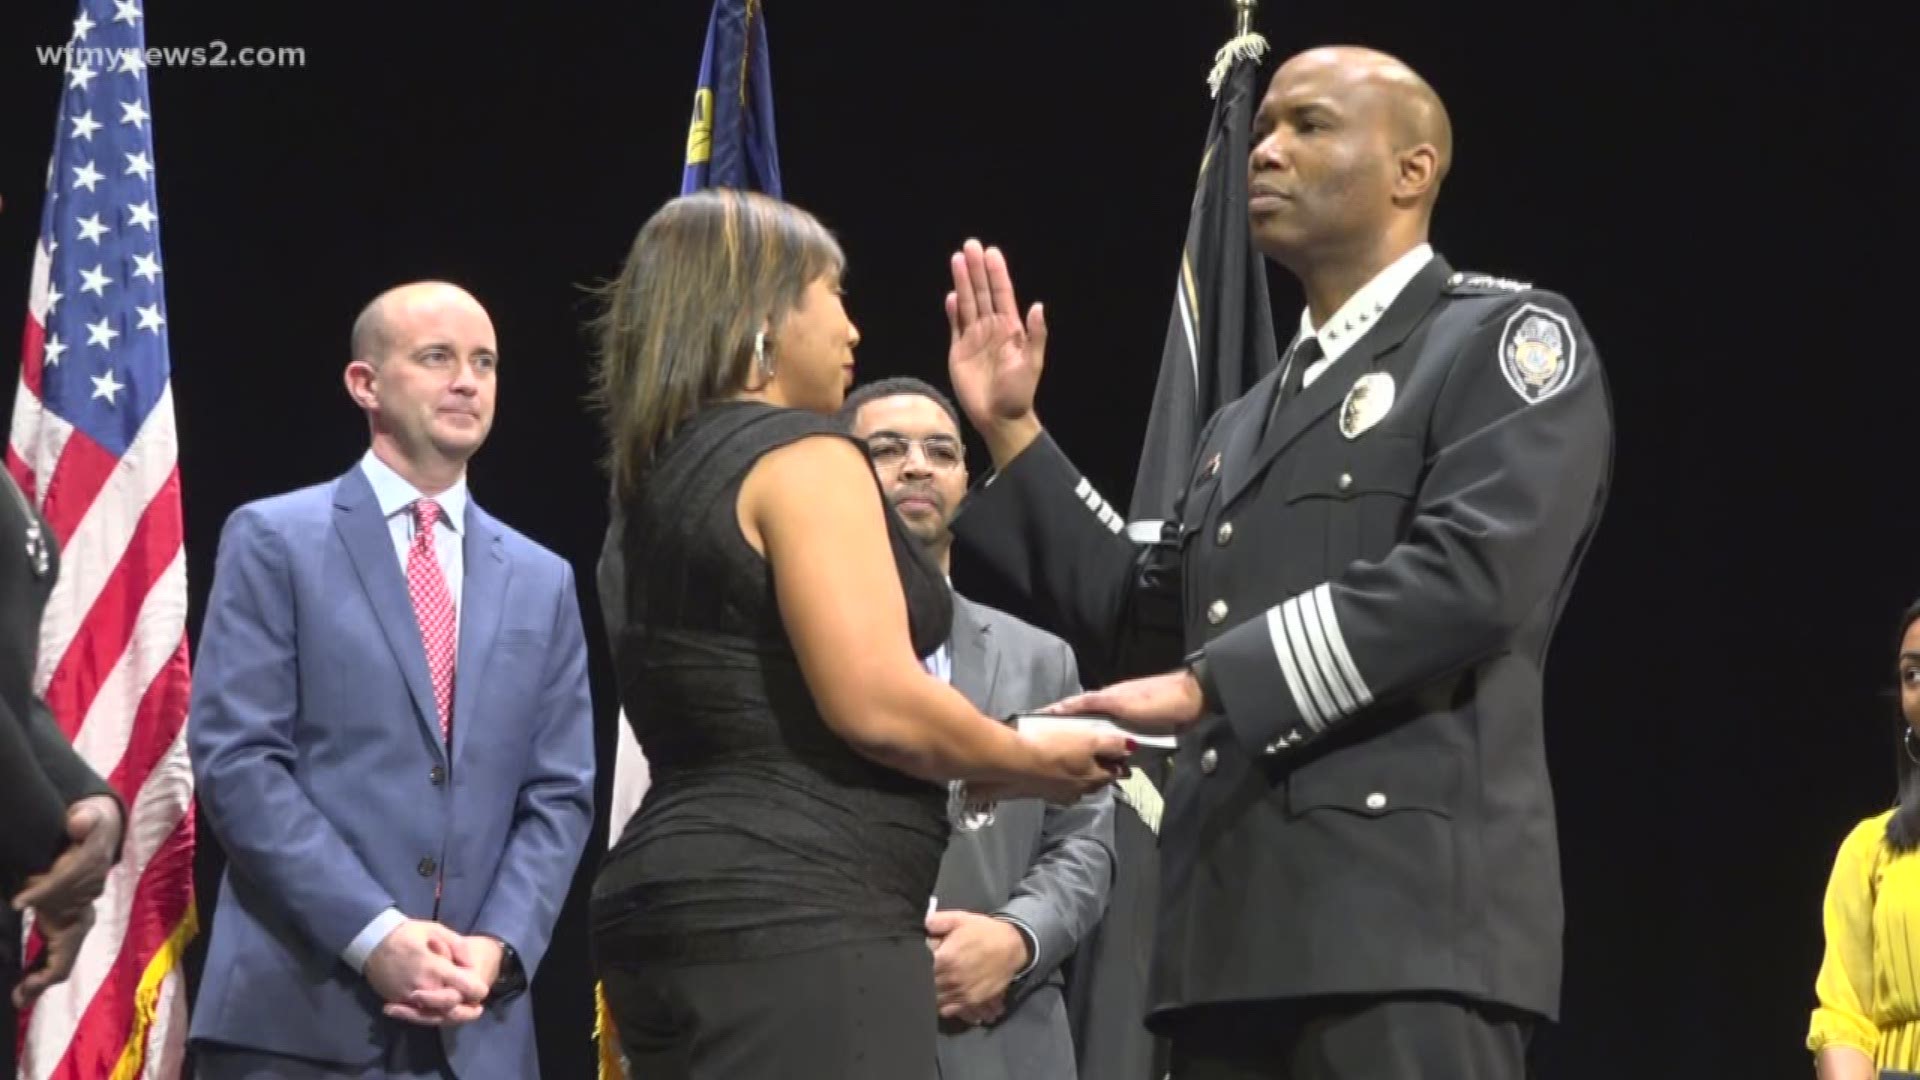 James was sworn in as the 23rd police chief of Greensboro on Friday.